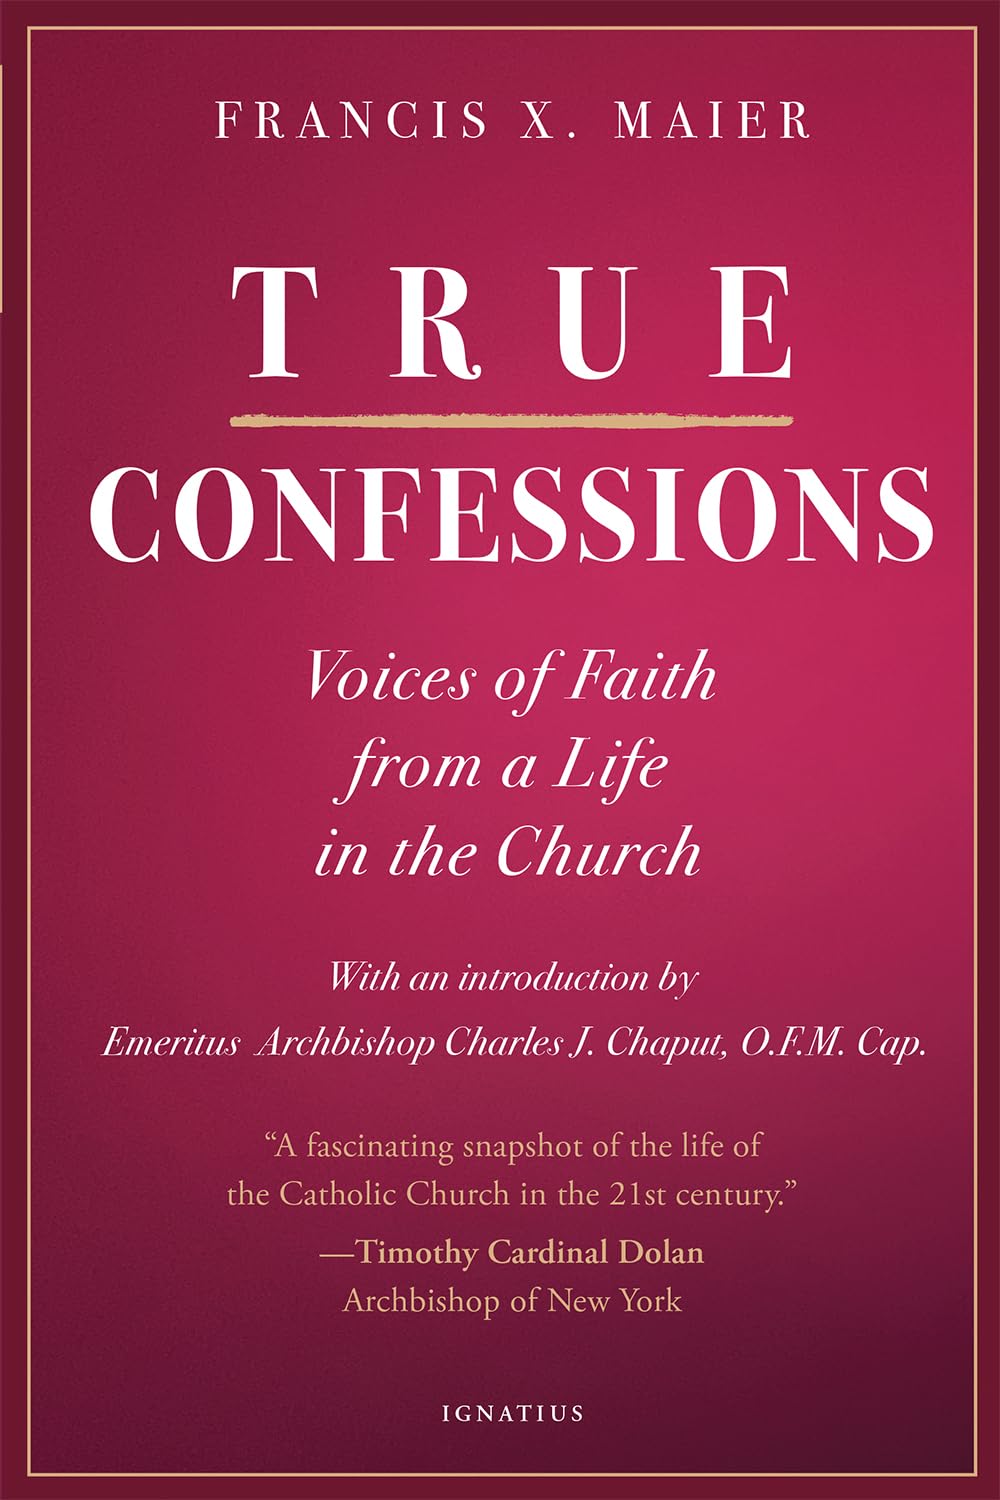 True Confessions: Voices of Faith from a Life in the Church